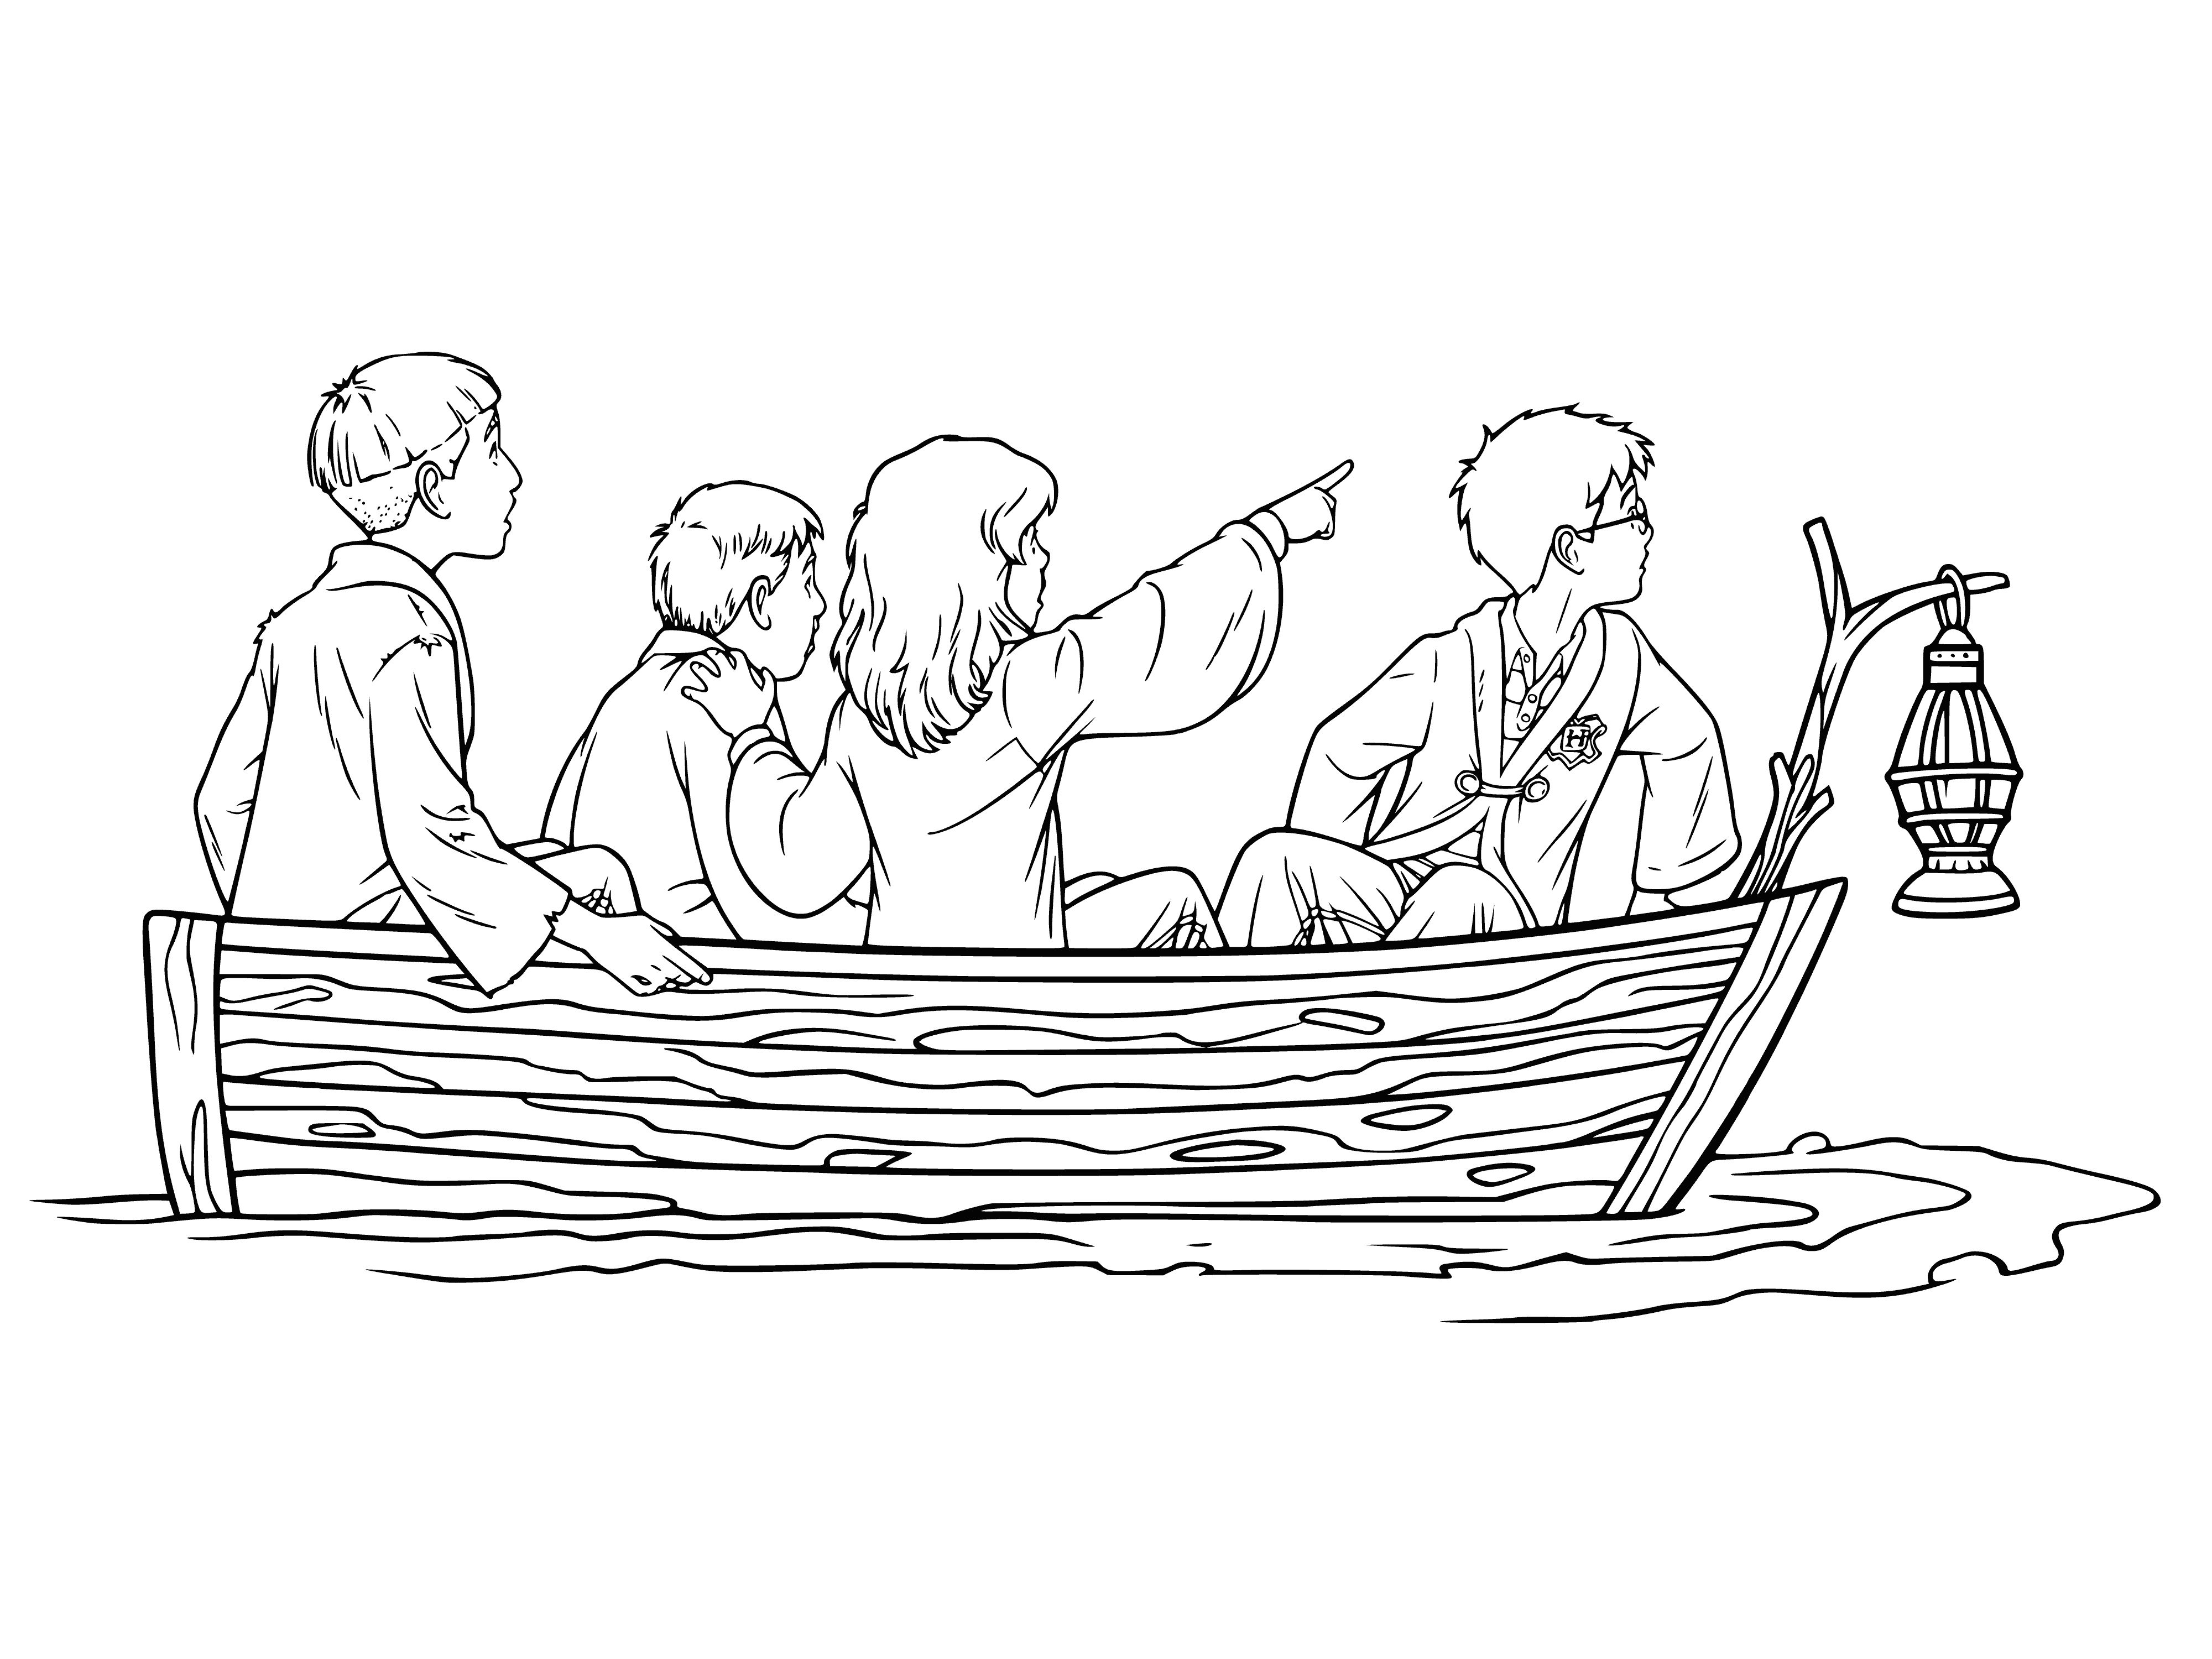 coloring page: Three kids rowing a boat across a calm lake beneath a clear sky. #HarryPotter